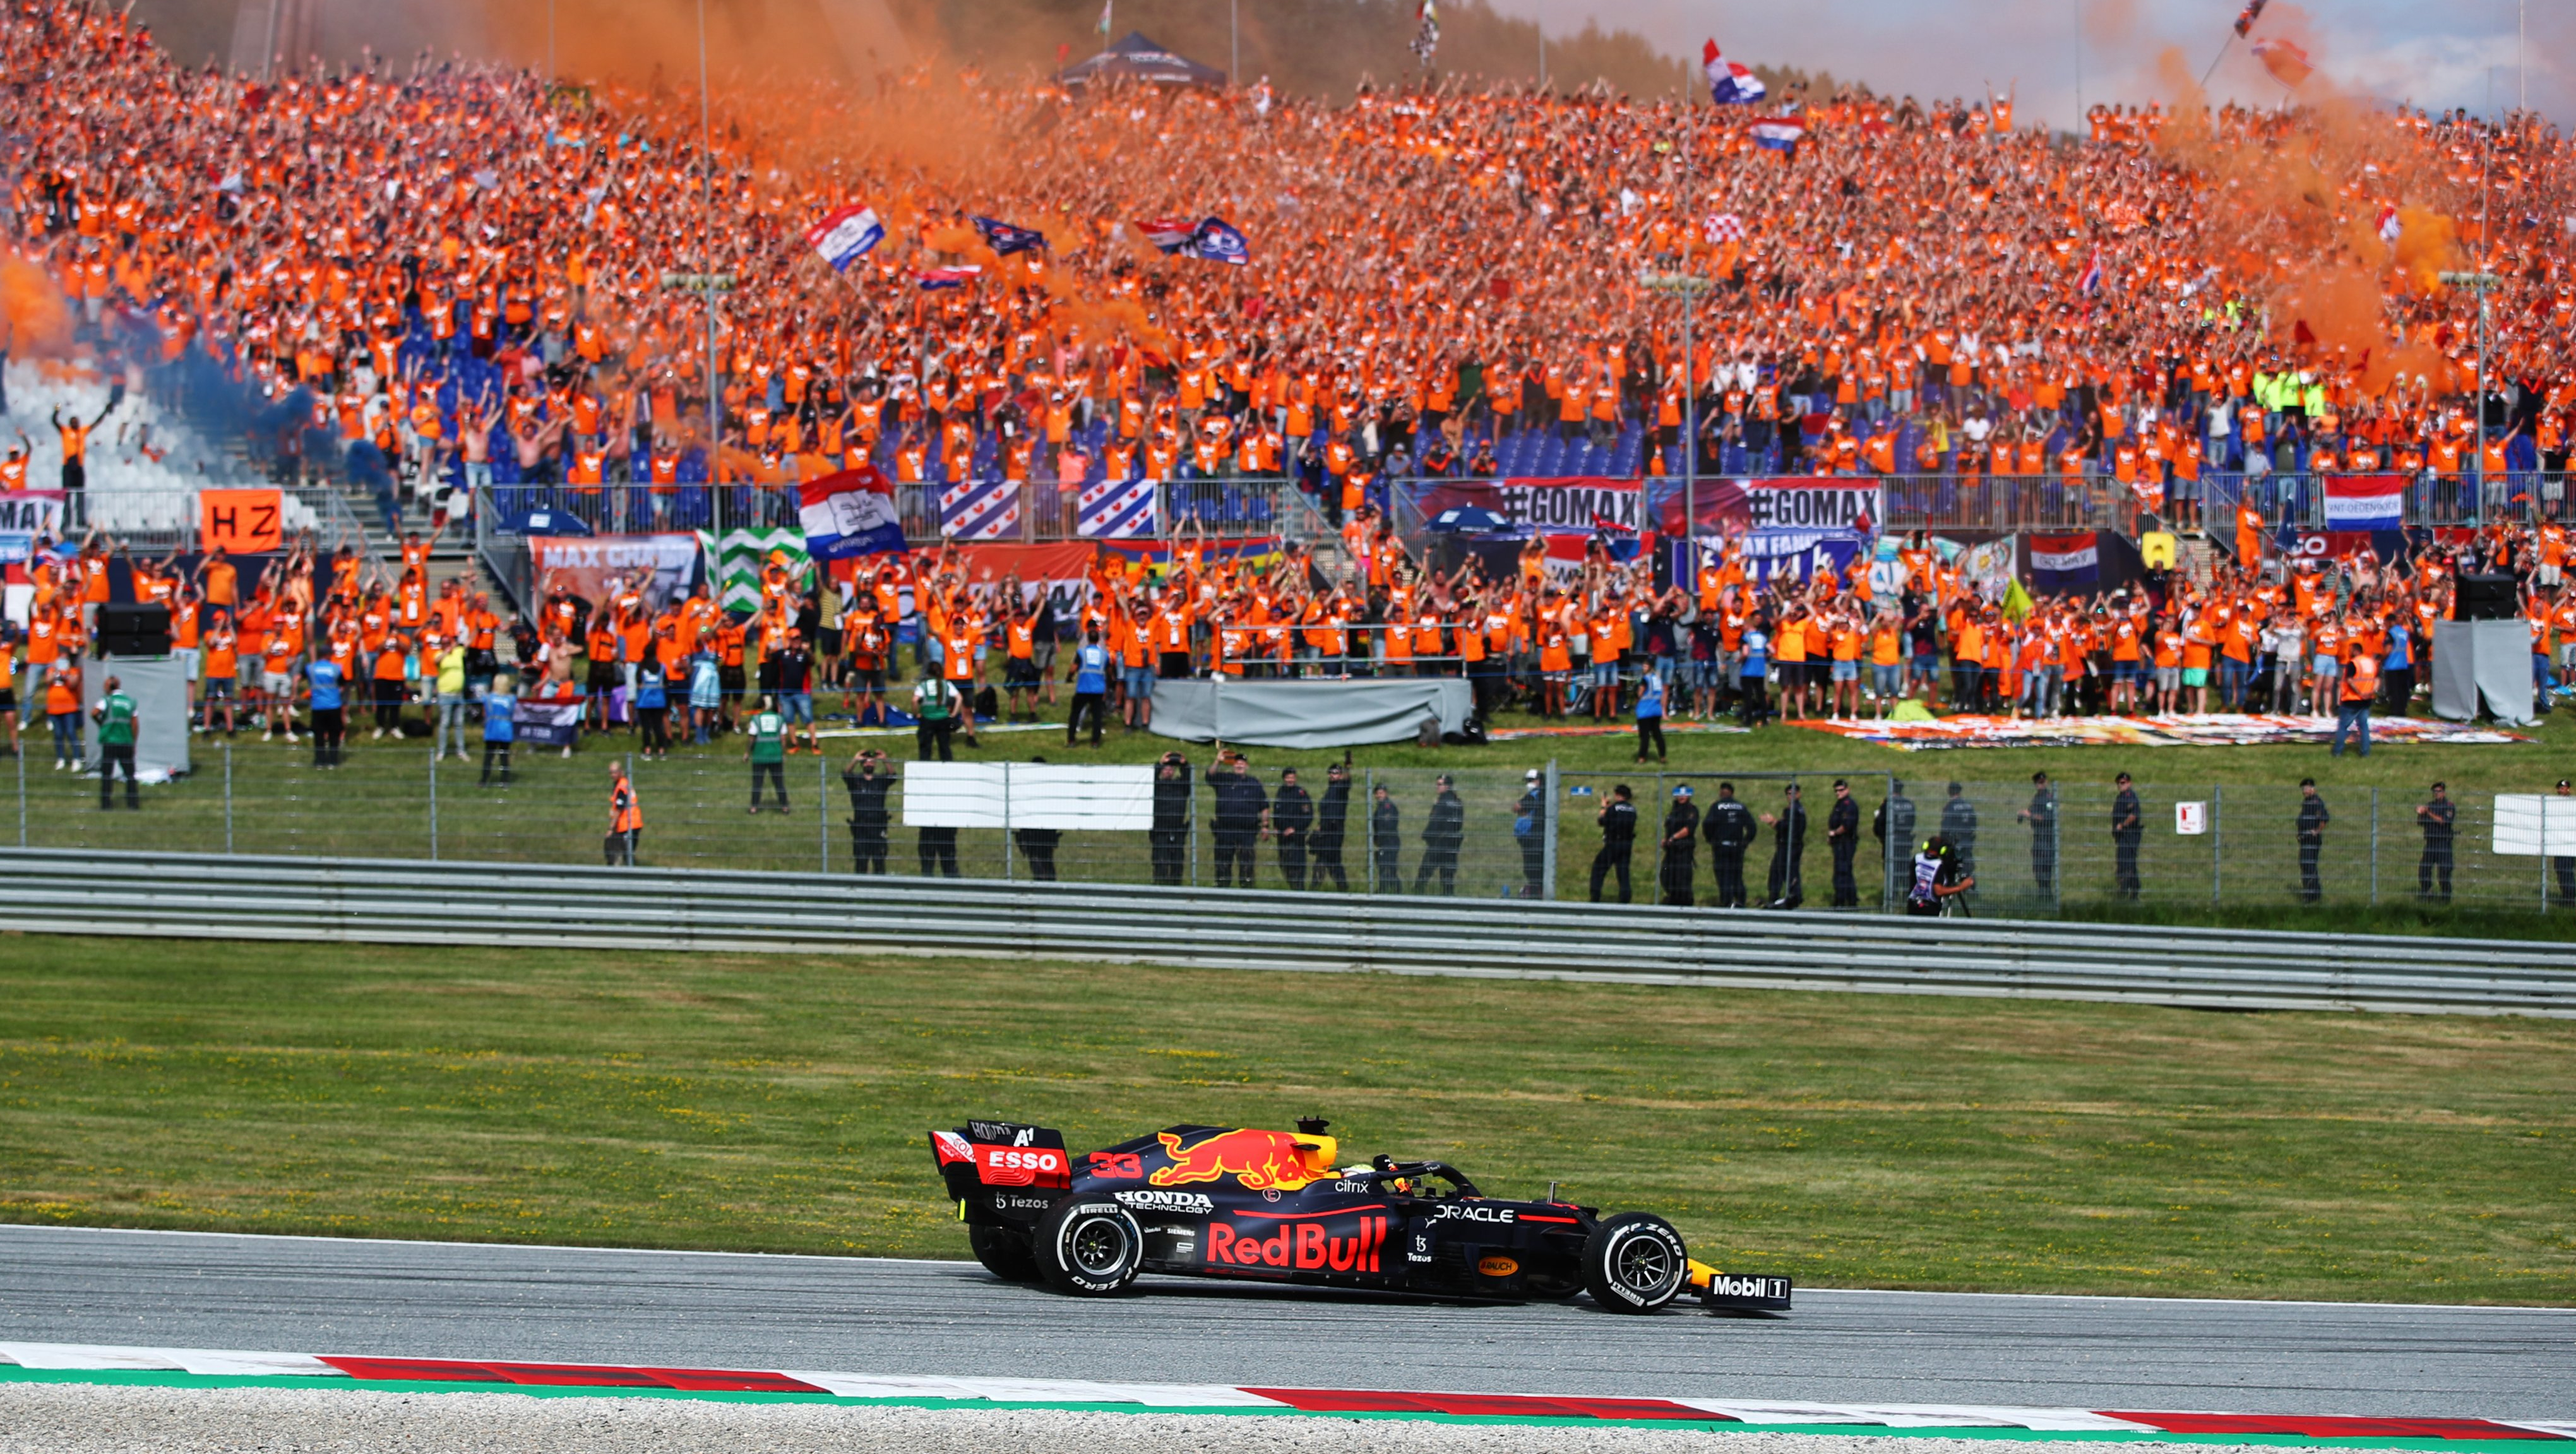 Austrian Gp 22 Preview Red Bull And Verstappen Arrive At Their Styrian Stronghold Matrax Lubricants